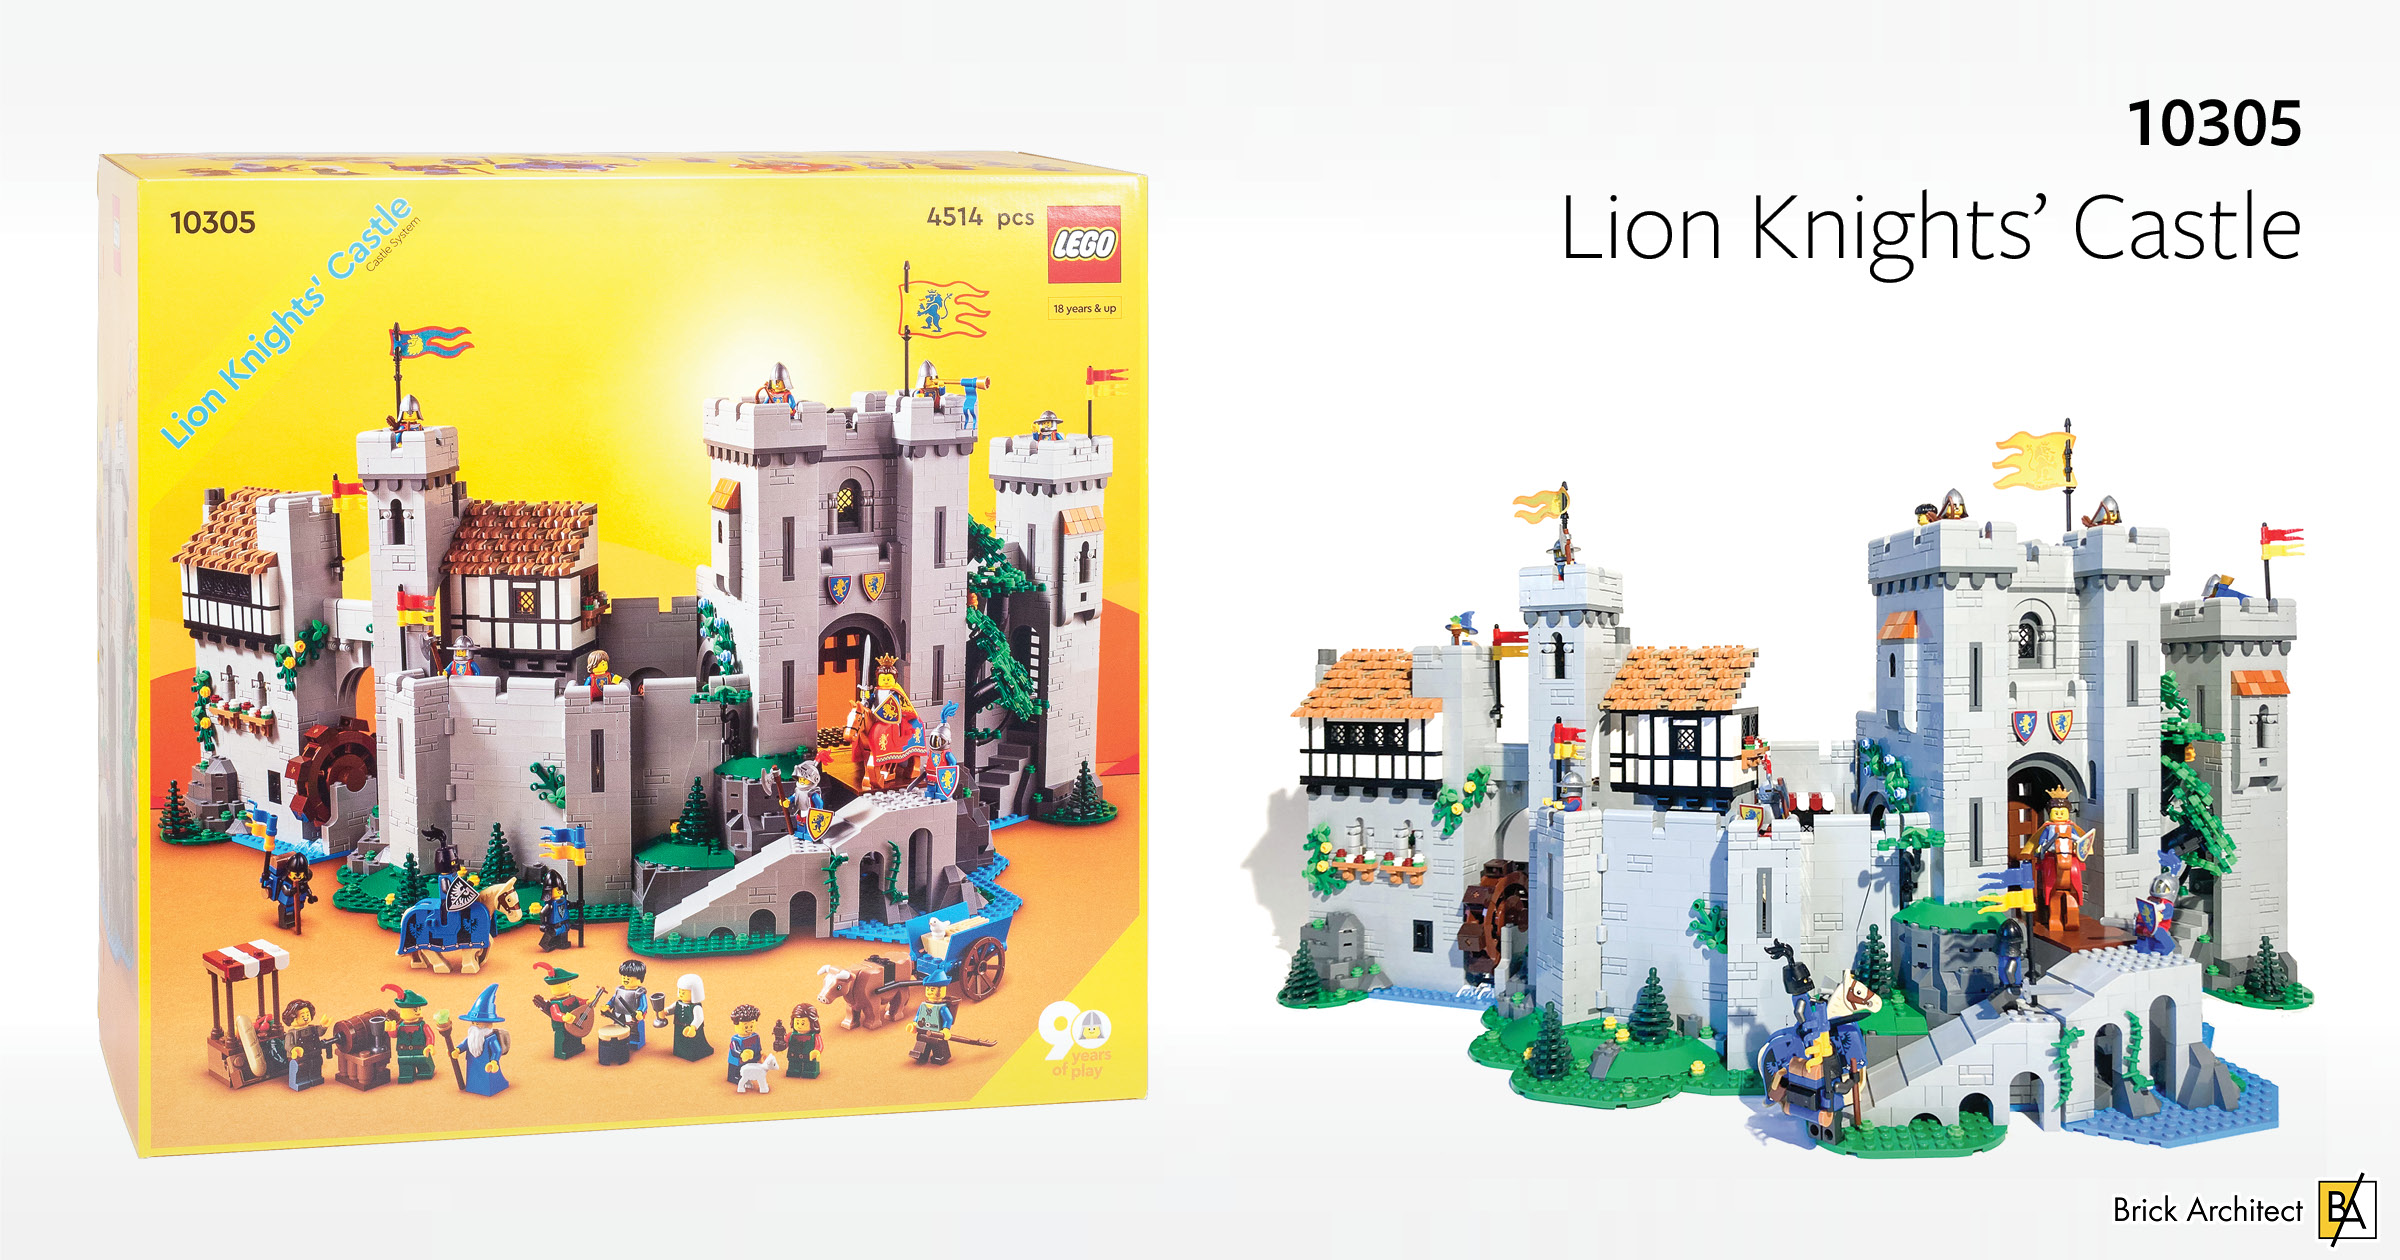 10305 Lion Knights Castle is an uncompromising homage to the early days of LEGO Castle.